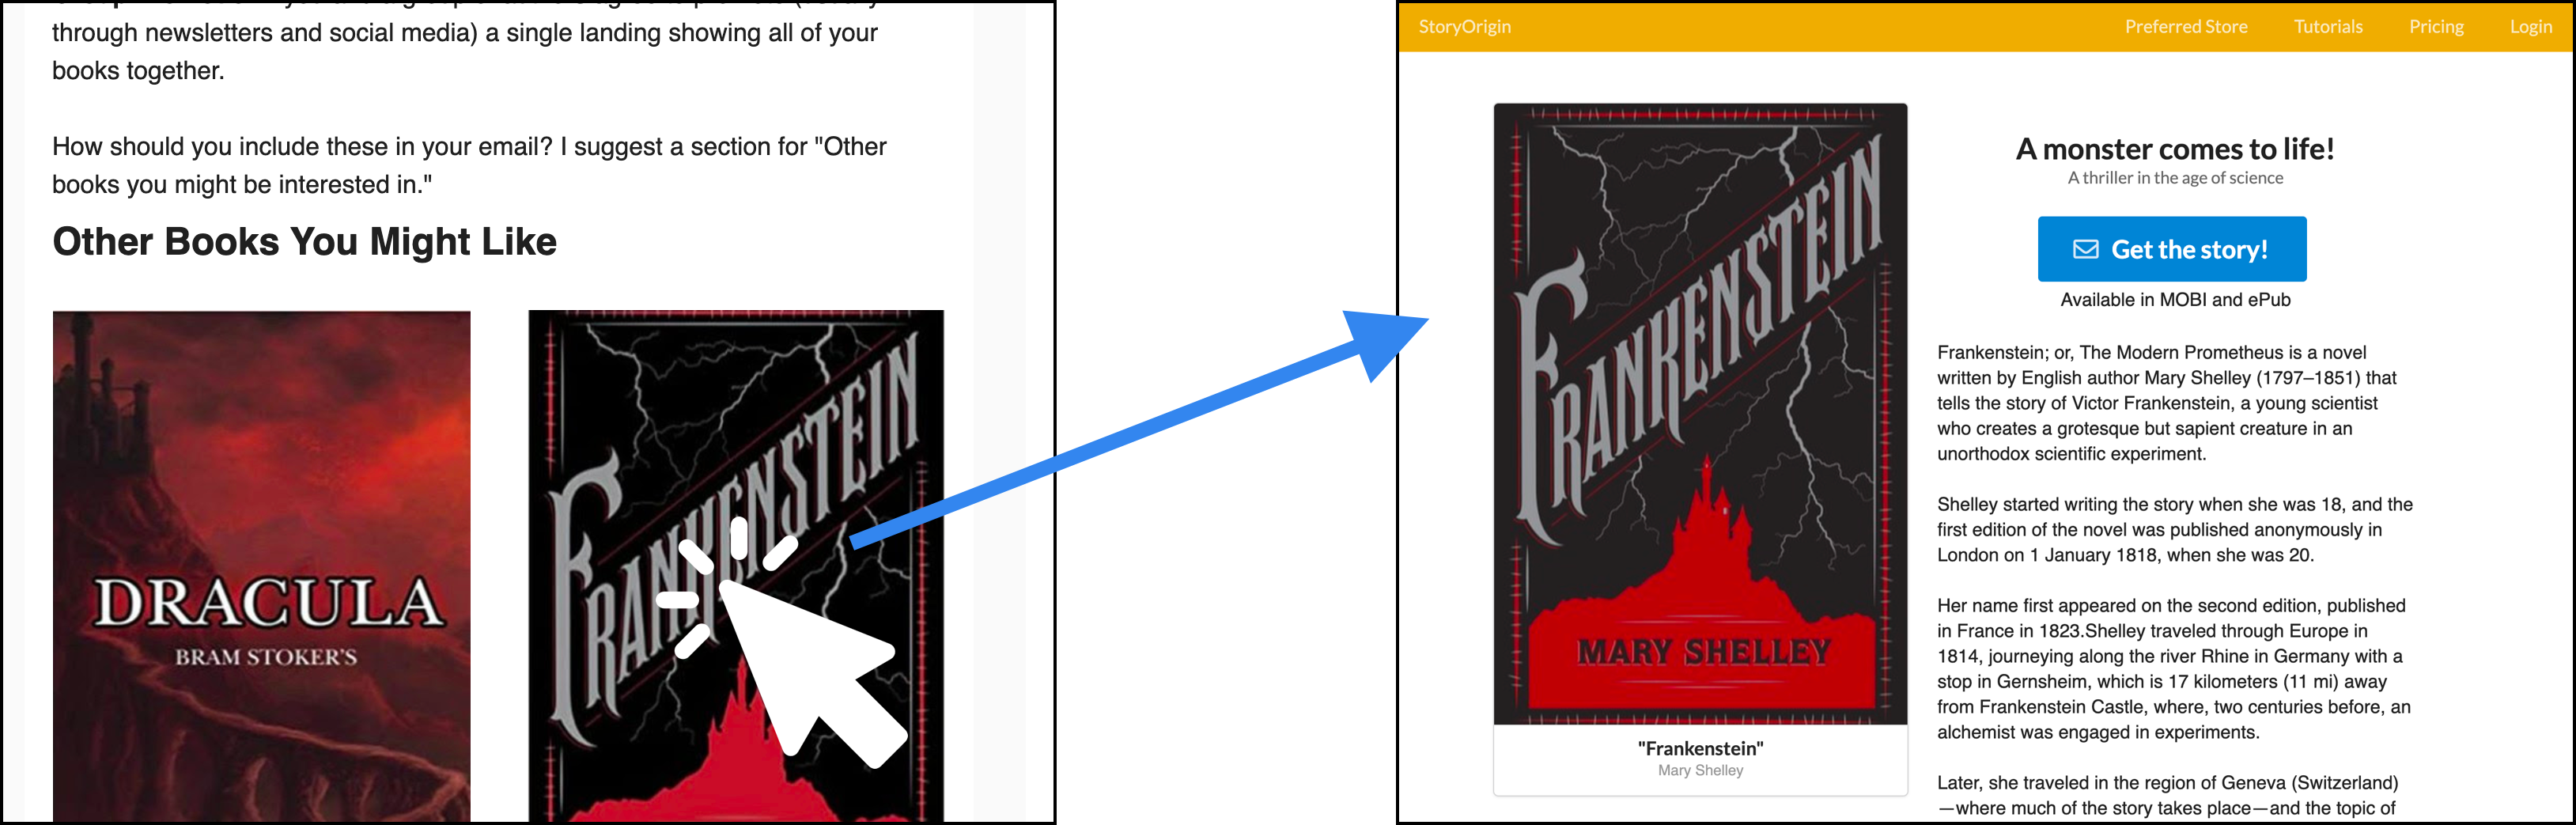 the book cover in the newsletter example links to the book's landing page